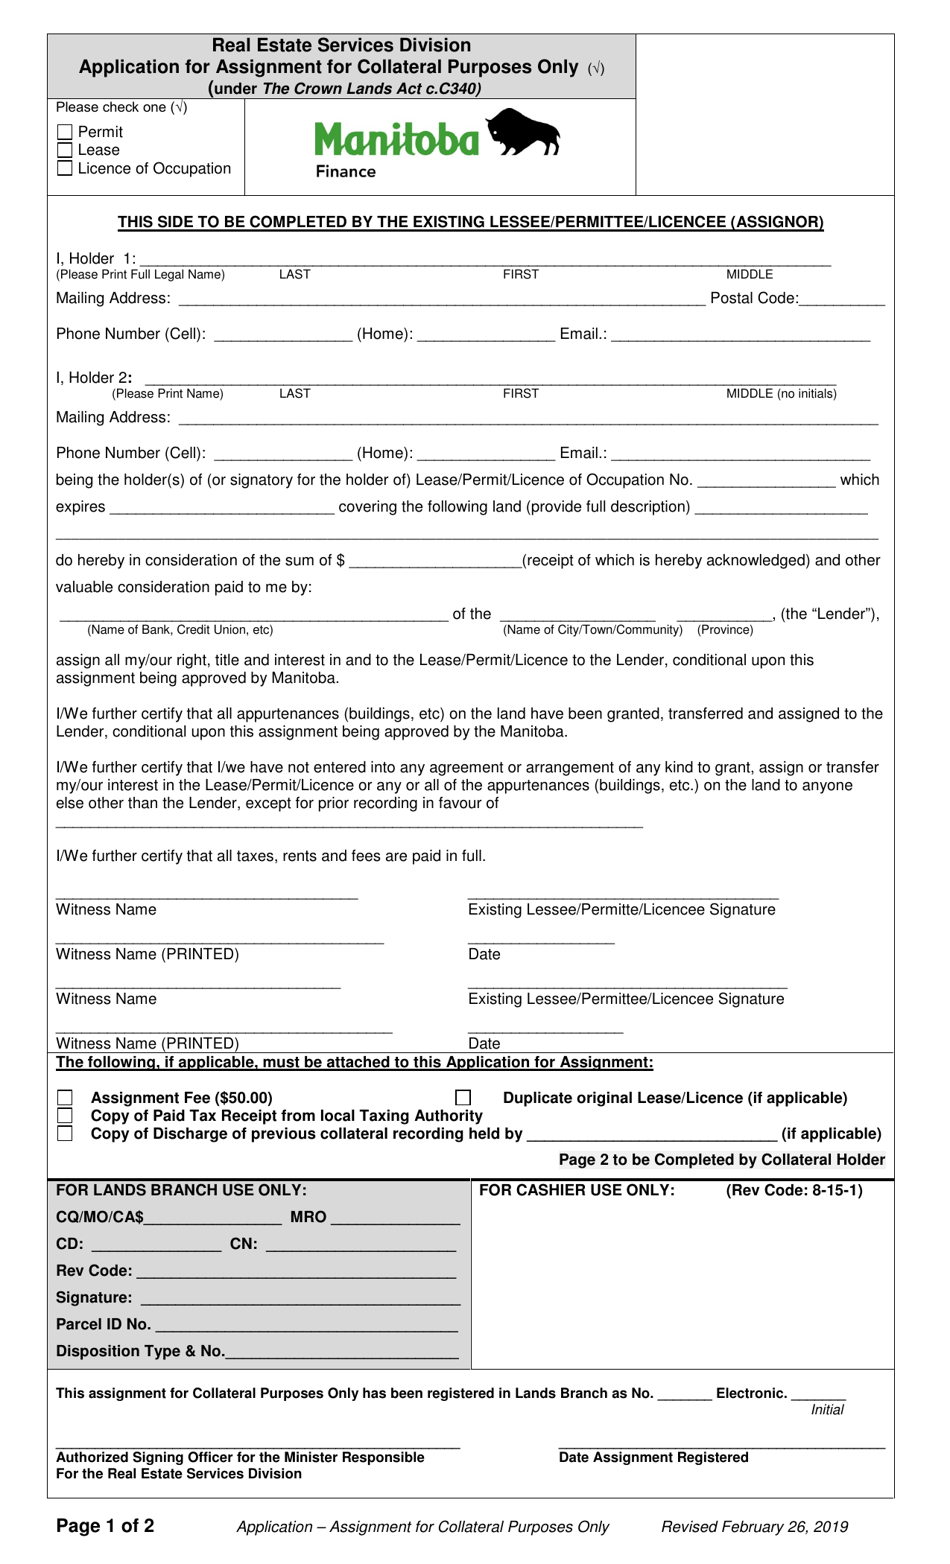 Application for Assignment for Collateral Purposes Only - Manitoba, Canada, Page 1